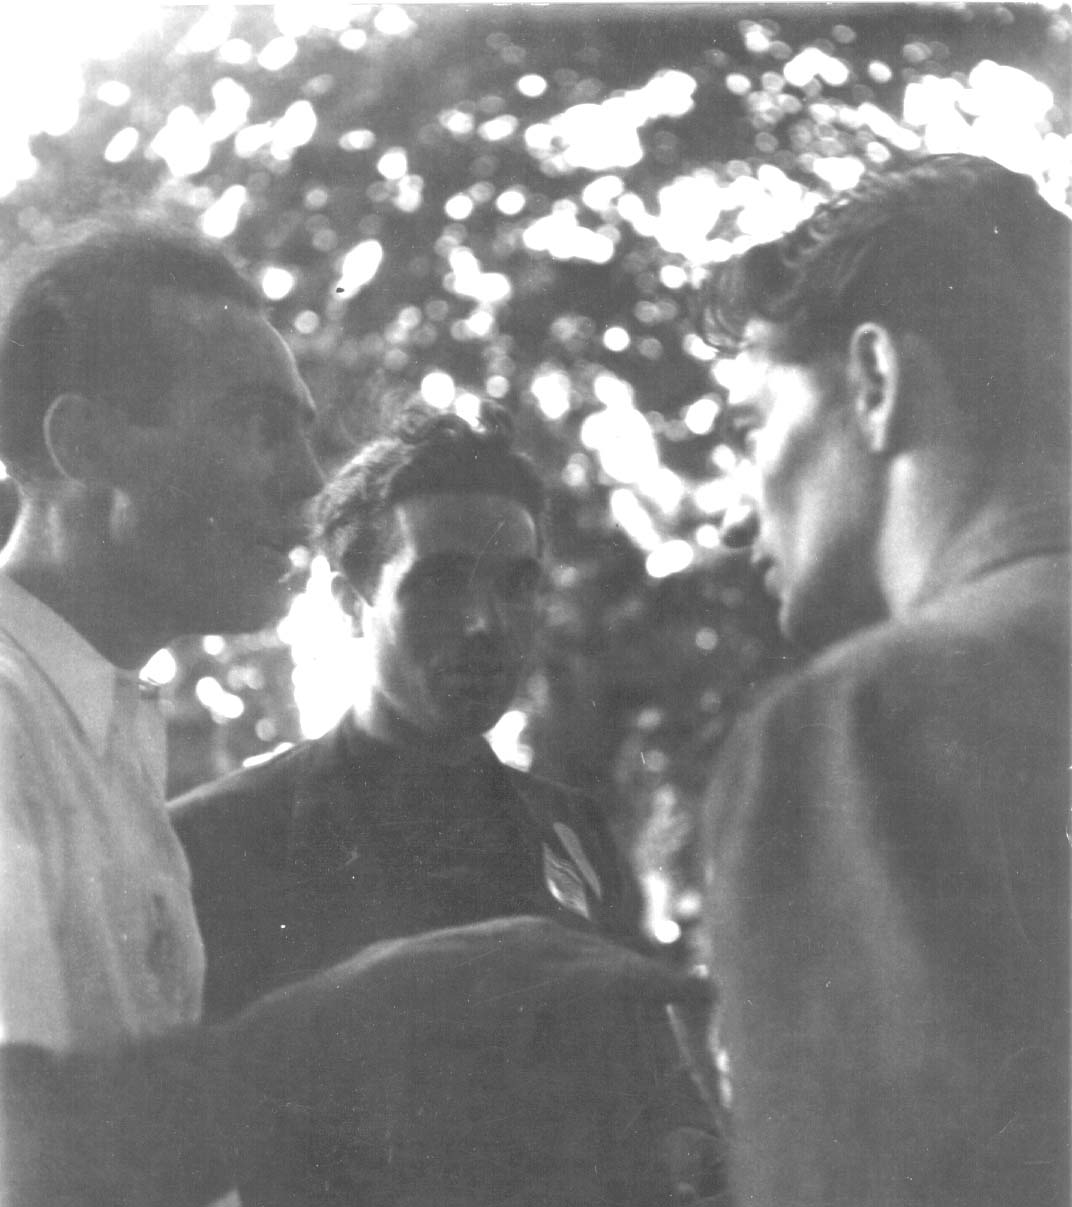 Jock Haston (centre) and Jimmy Deane (right) in Paris.